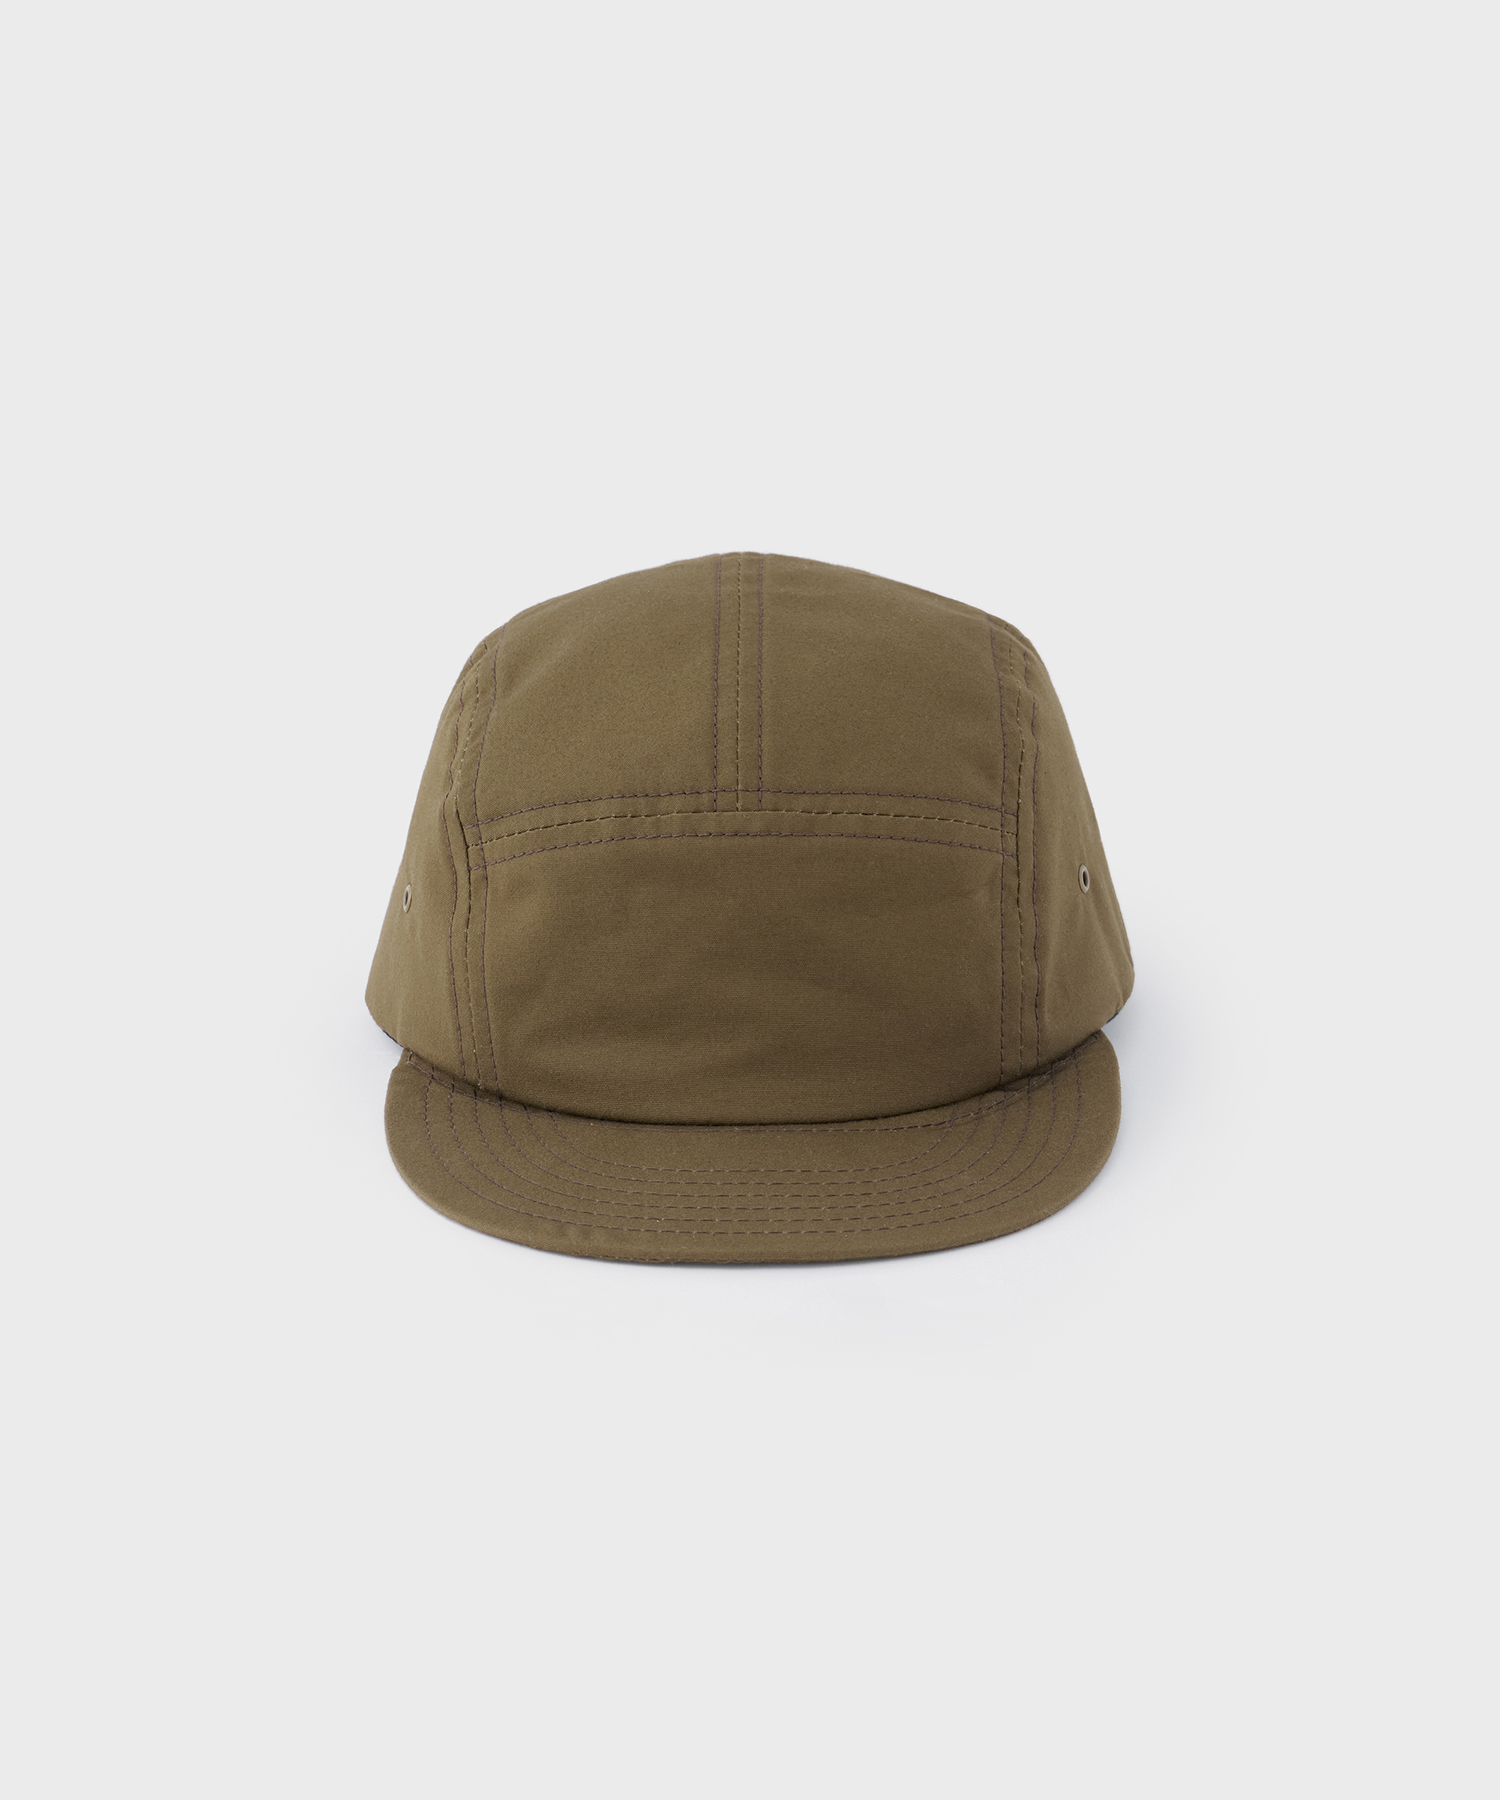 RACAL for A/O. Exclusive Flip Up Jet Ventile Cap (Brown)